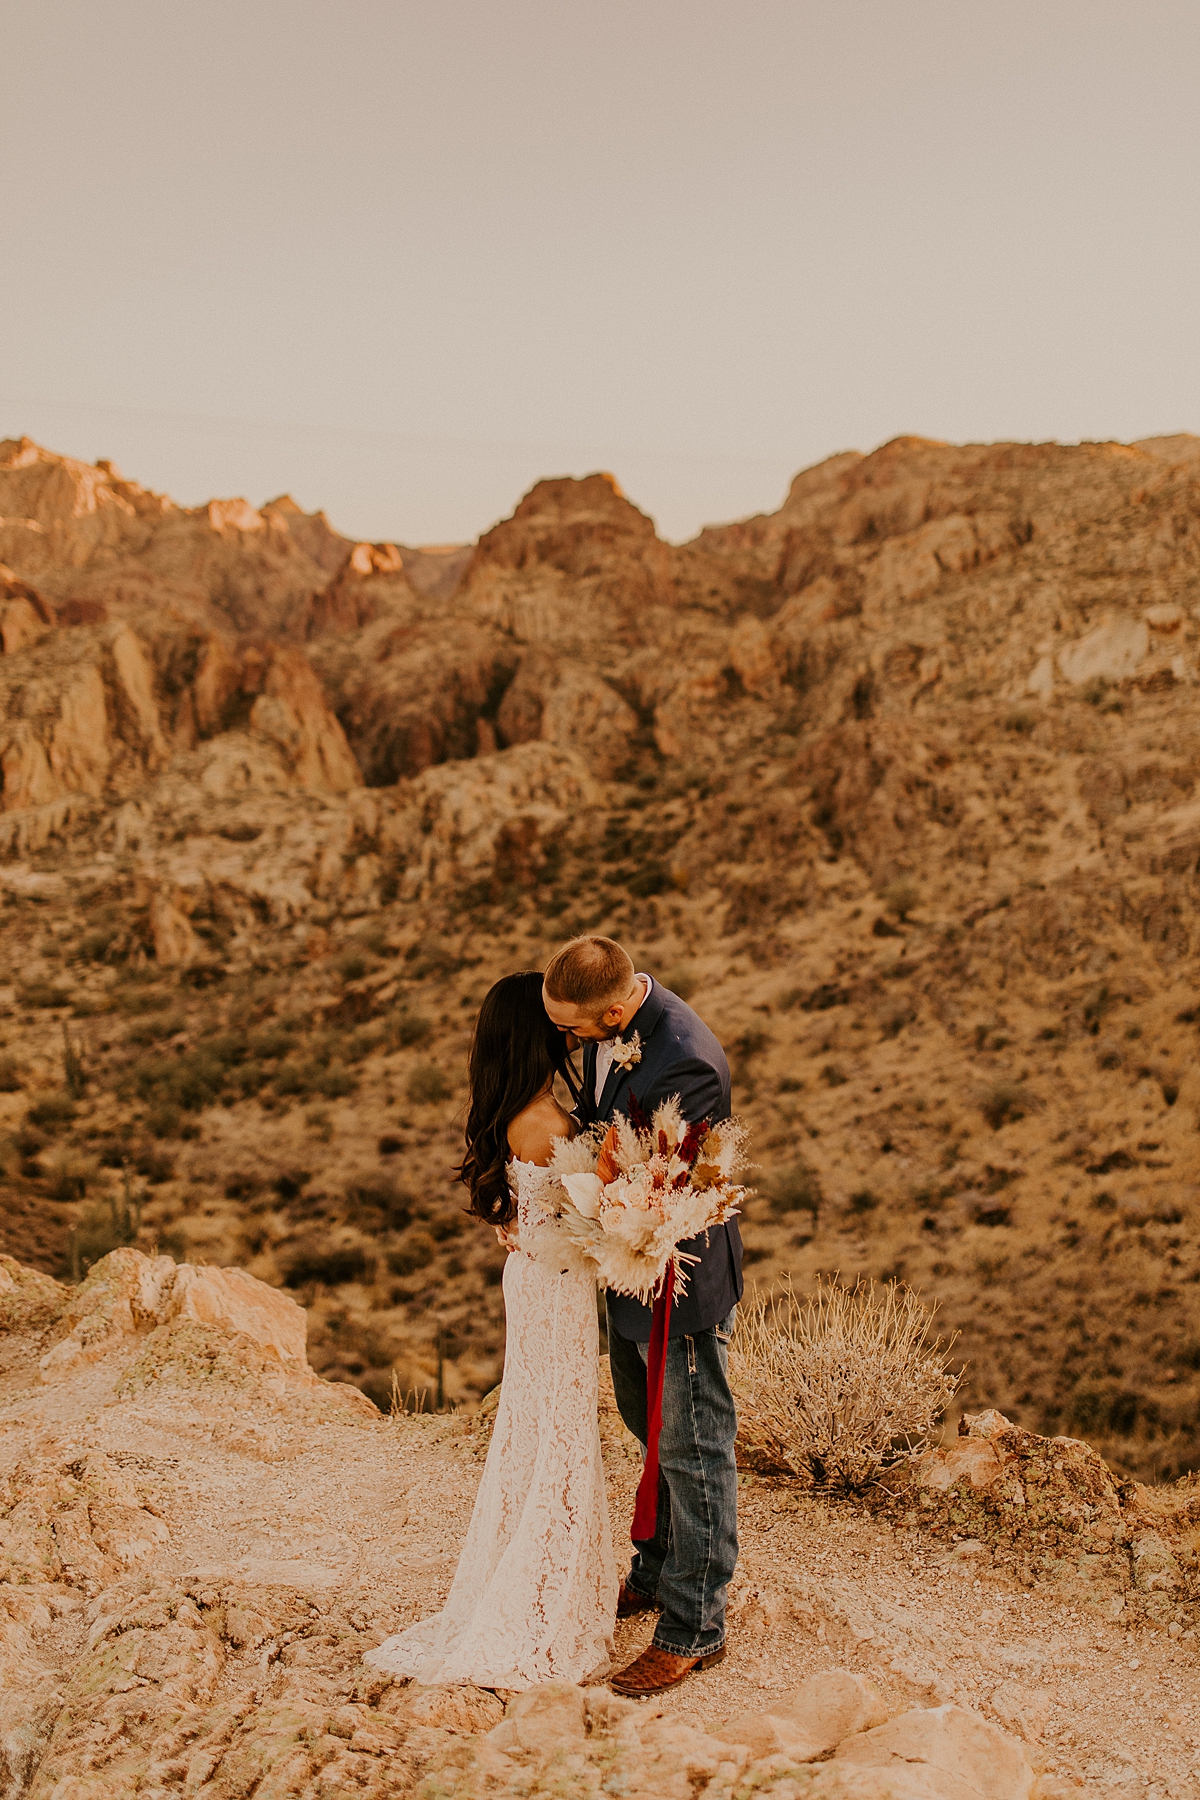 Intimate-elopement-in-superstition-mountain-wilderness-allison-slater-photography77.jpg